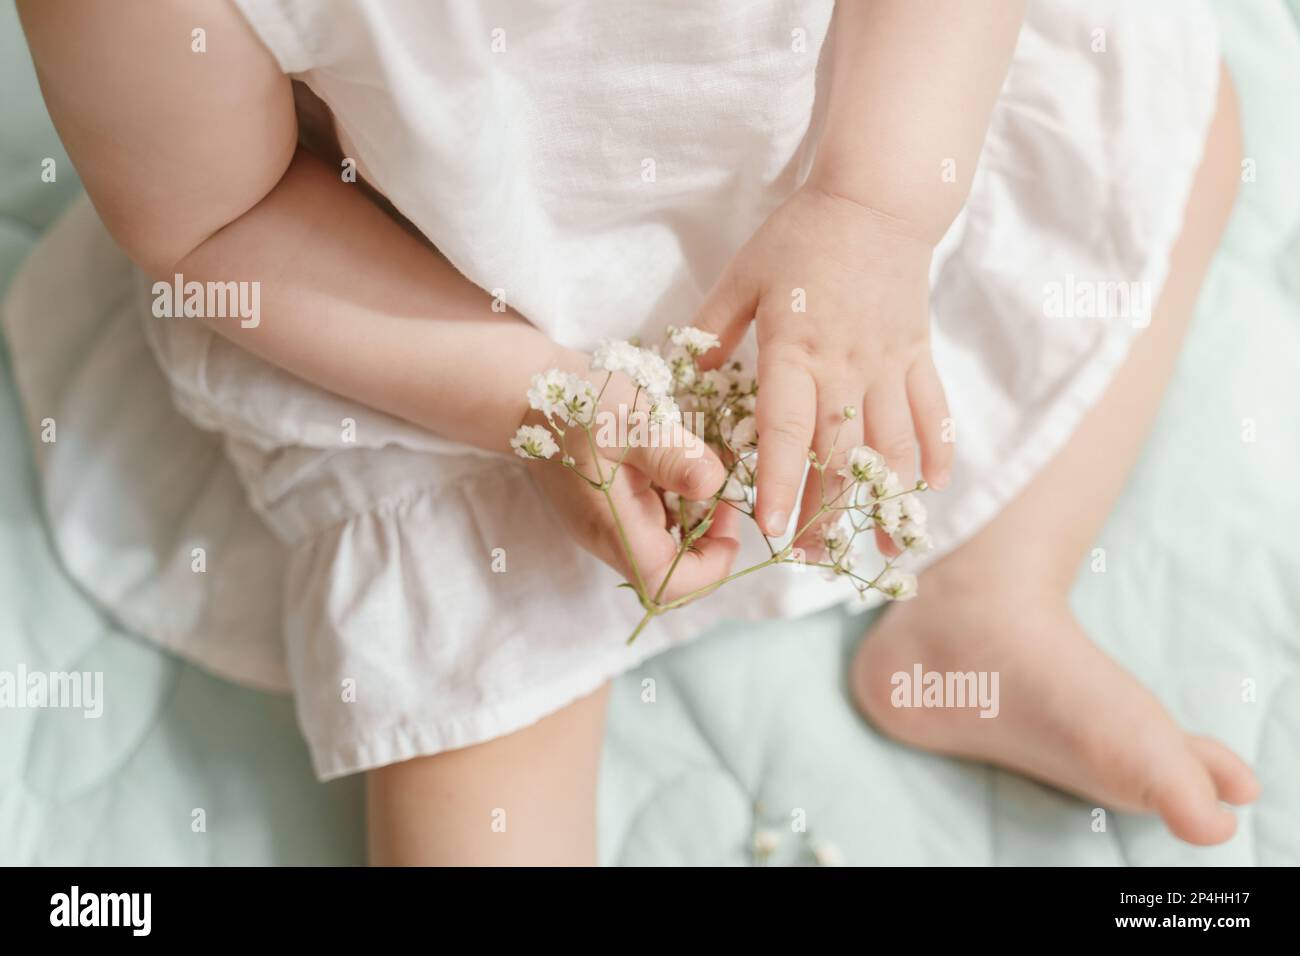 Hands of a baby girl in a white linen dress with gypsophila Stock Photo